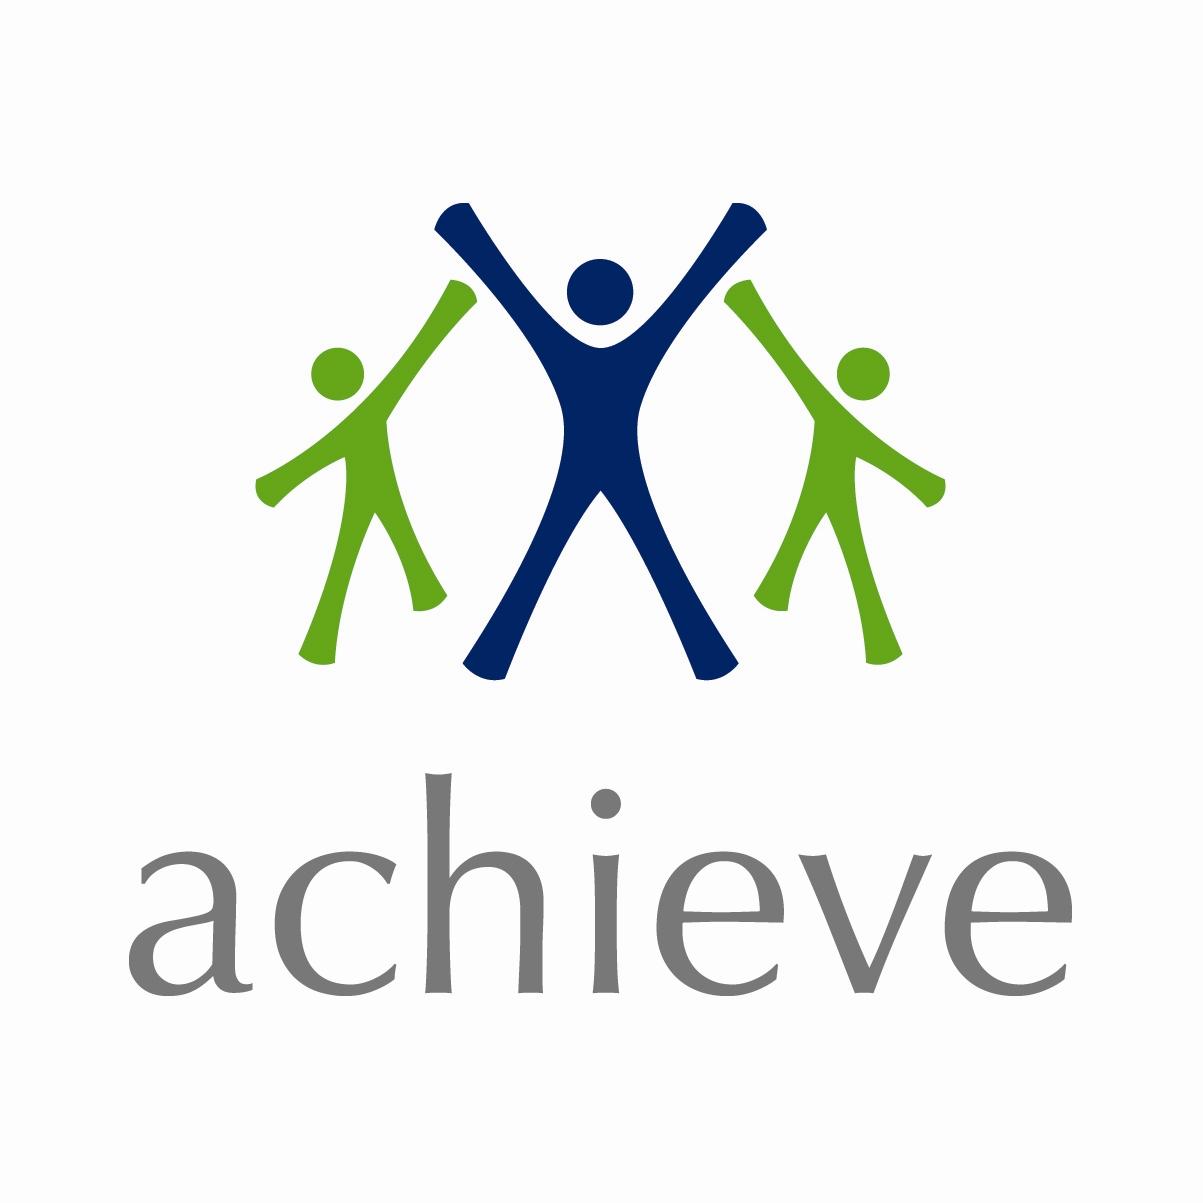 Achieve Meaning and Definition